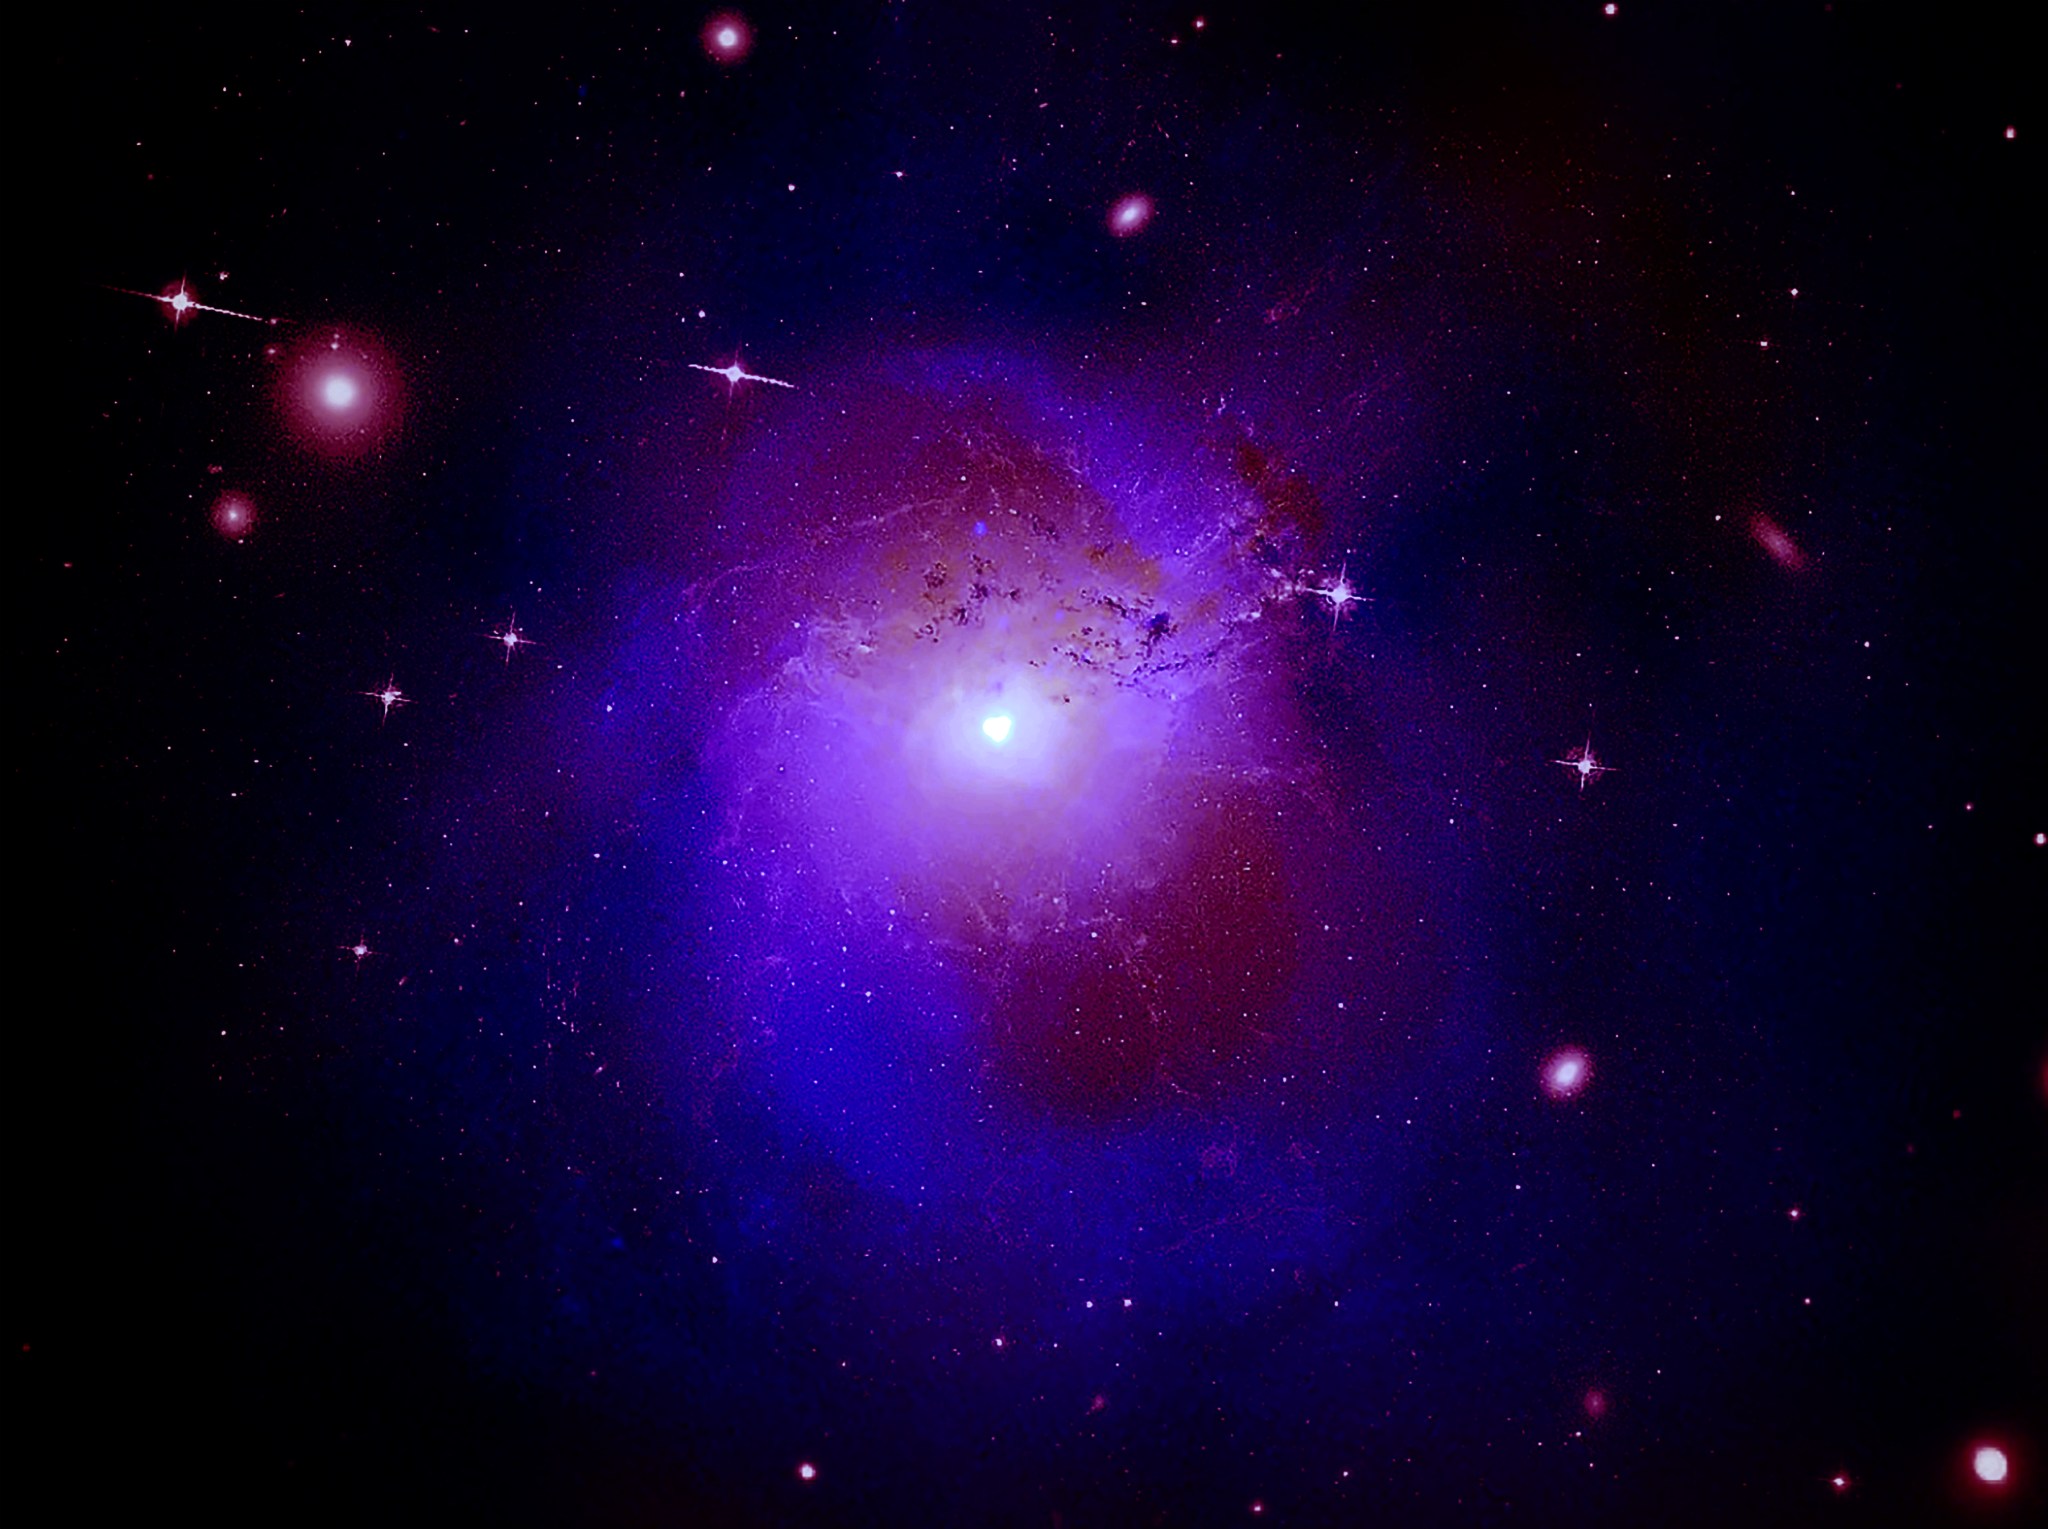 Composite image of the Perseus galaxy cluster using data from Chandra X-ray Observatory, ESA’s XMM-Newton and Hitomi.